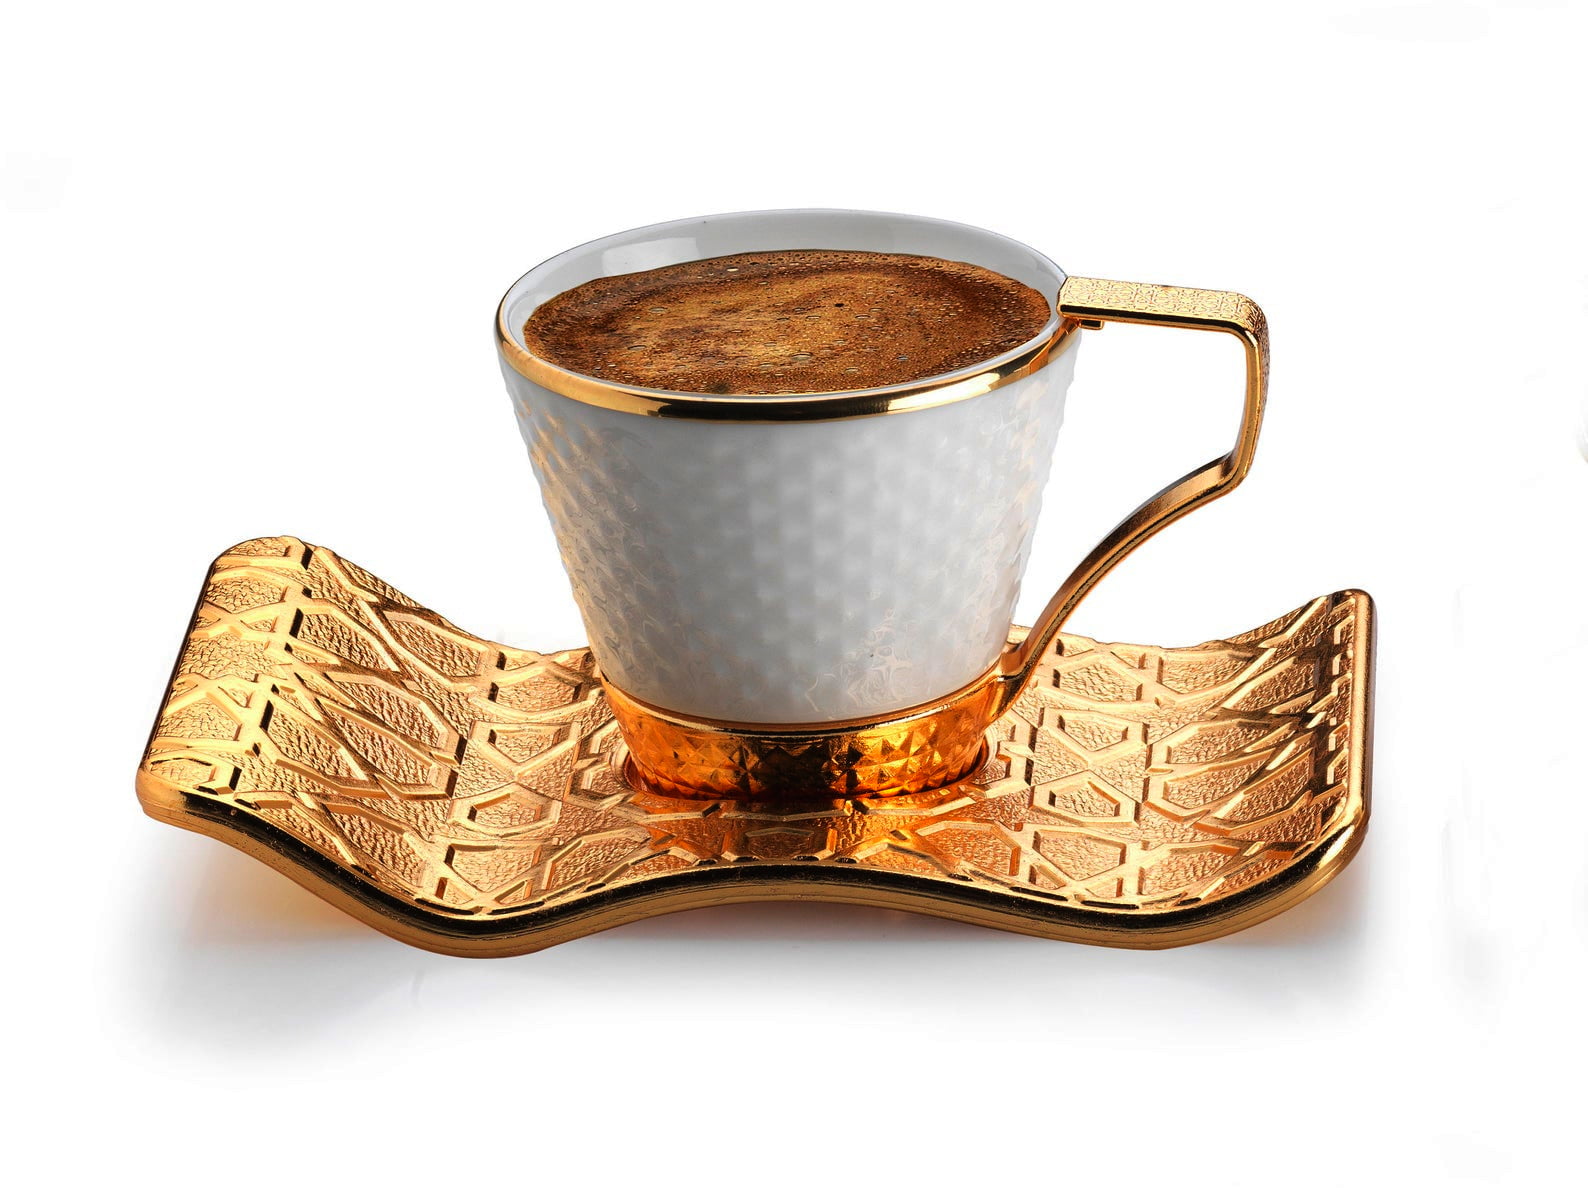 https://traditionalturk.com/wp-content/uploads/2021/05/luxury-gold-color-turkish-coffee-cup-set-for-six-person-1.jpg